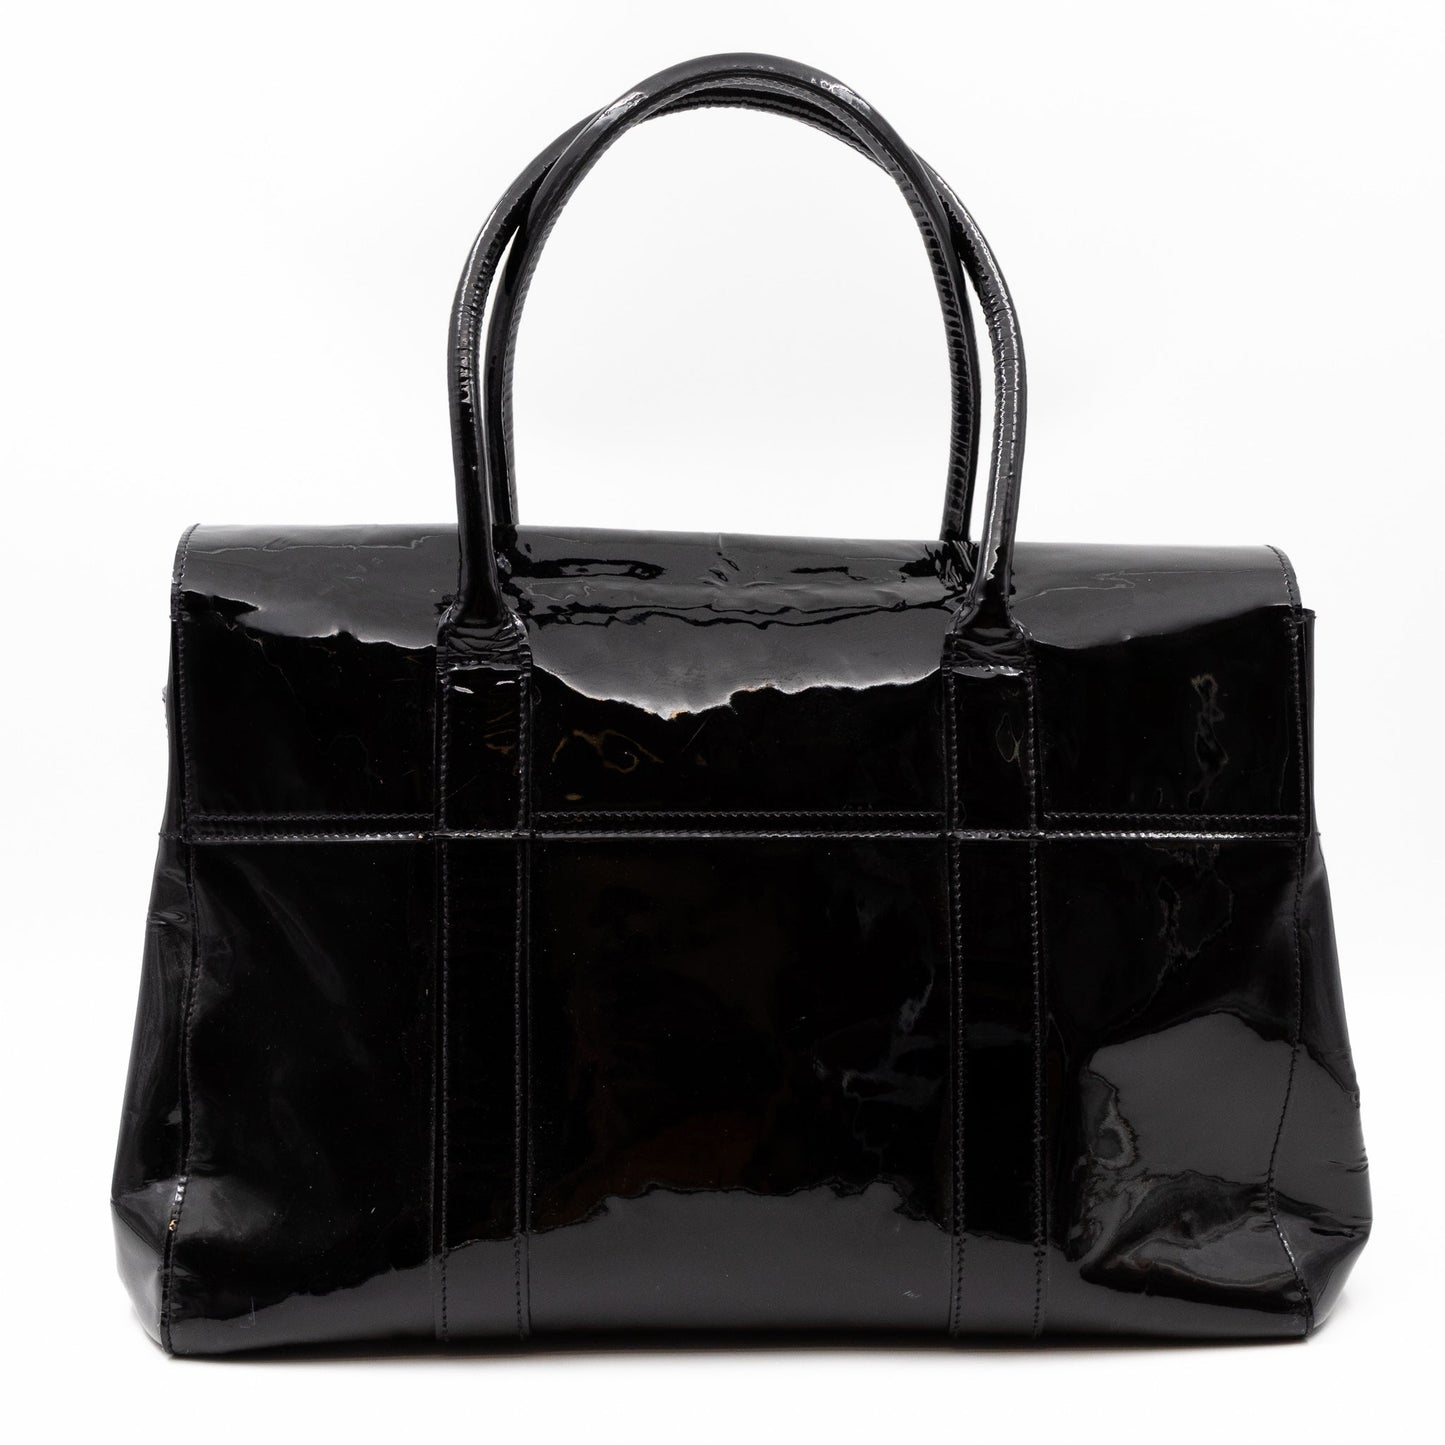 Bayswater Black Patent Leather